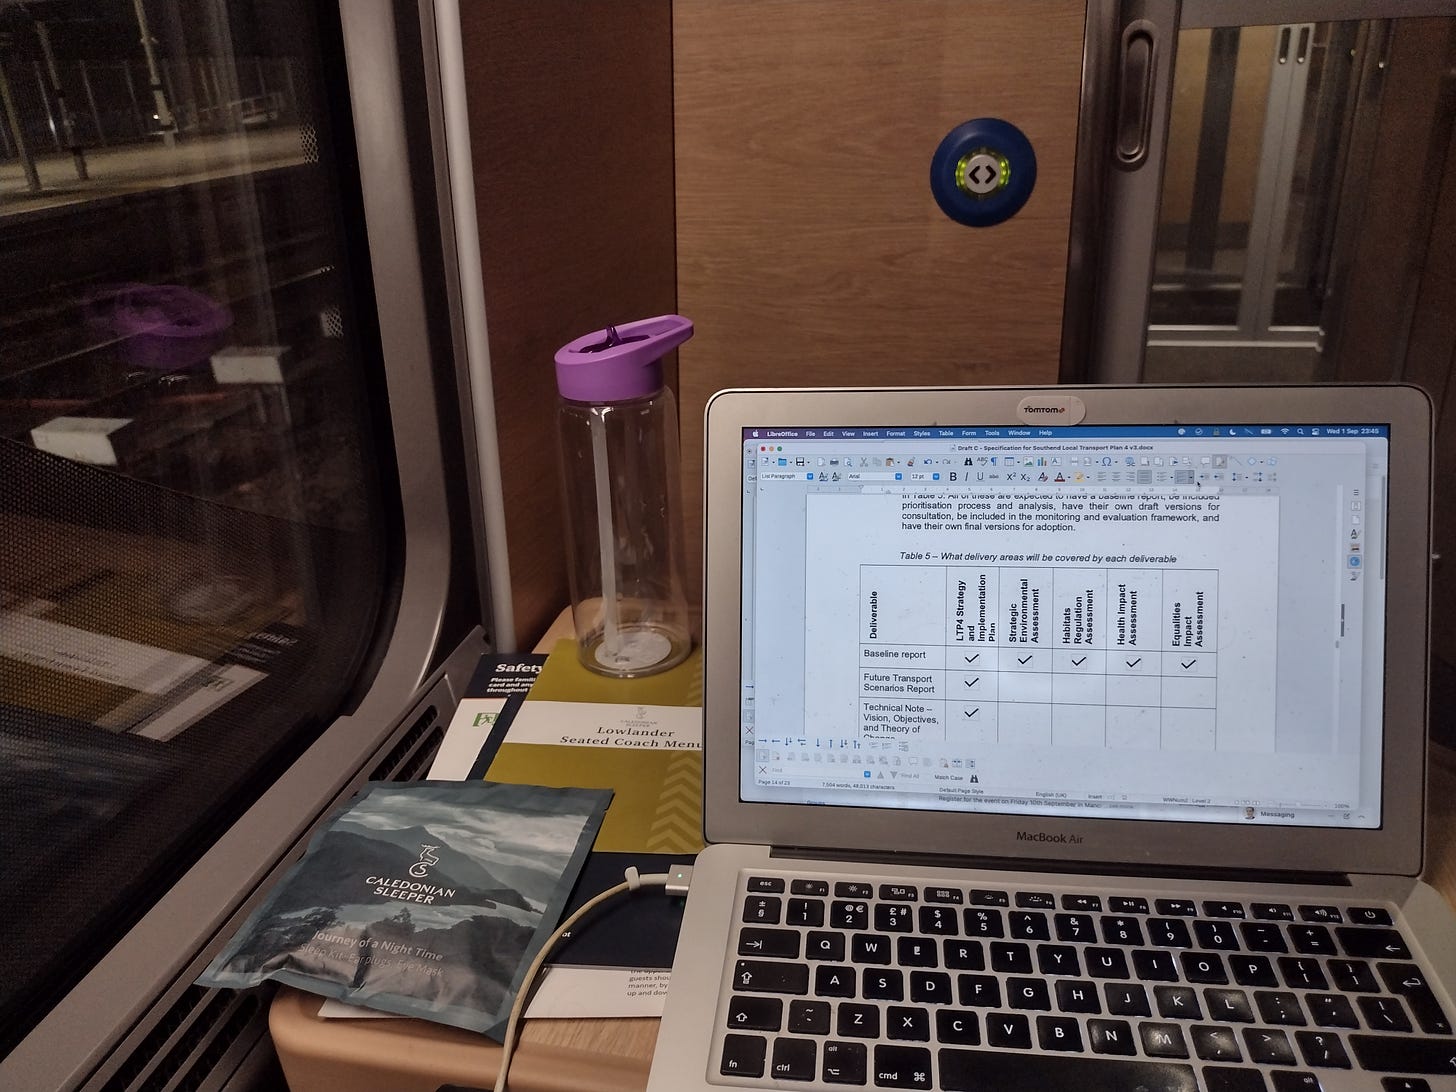 On board the sleeper train. There is a laptop and water flask on a small table, with a window to the left